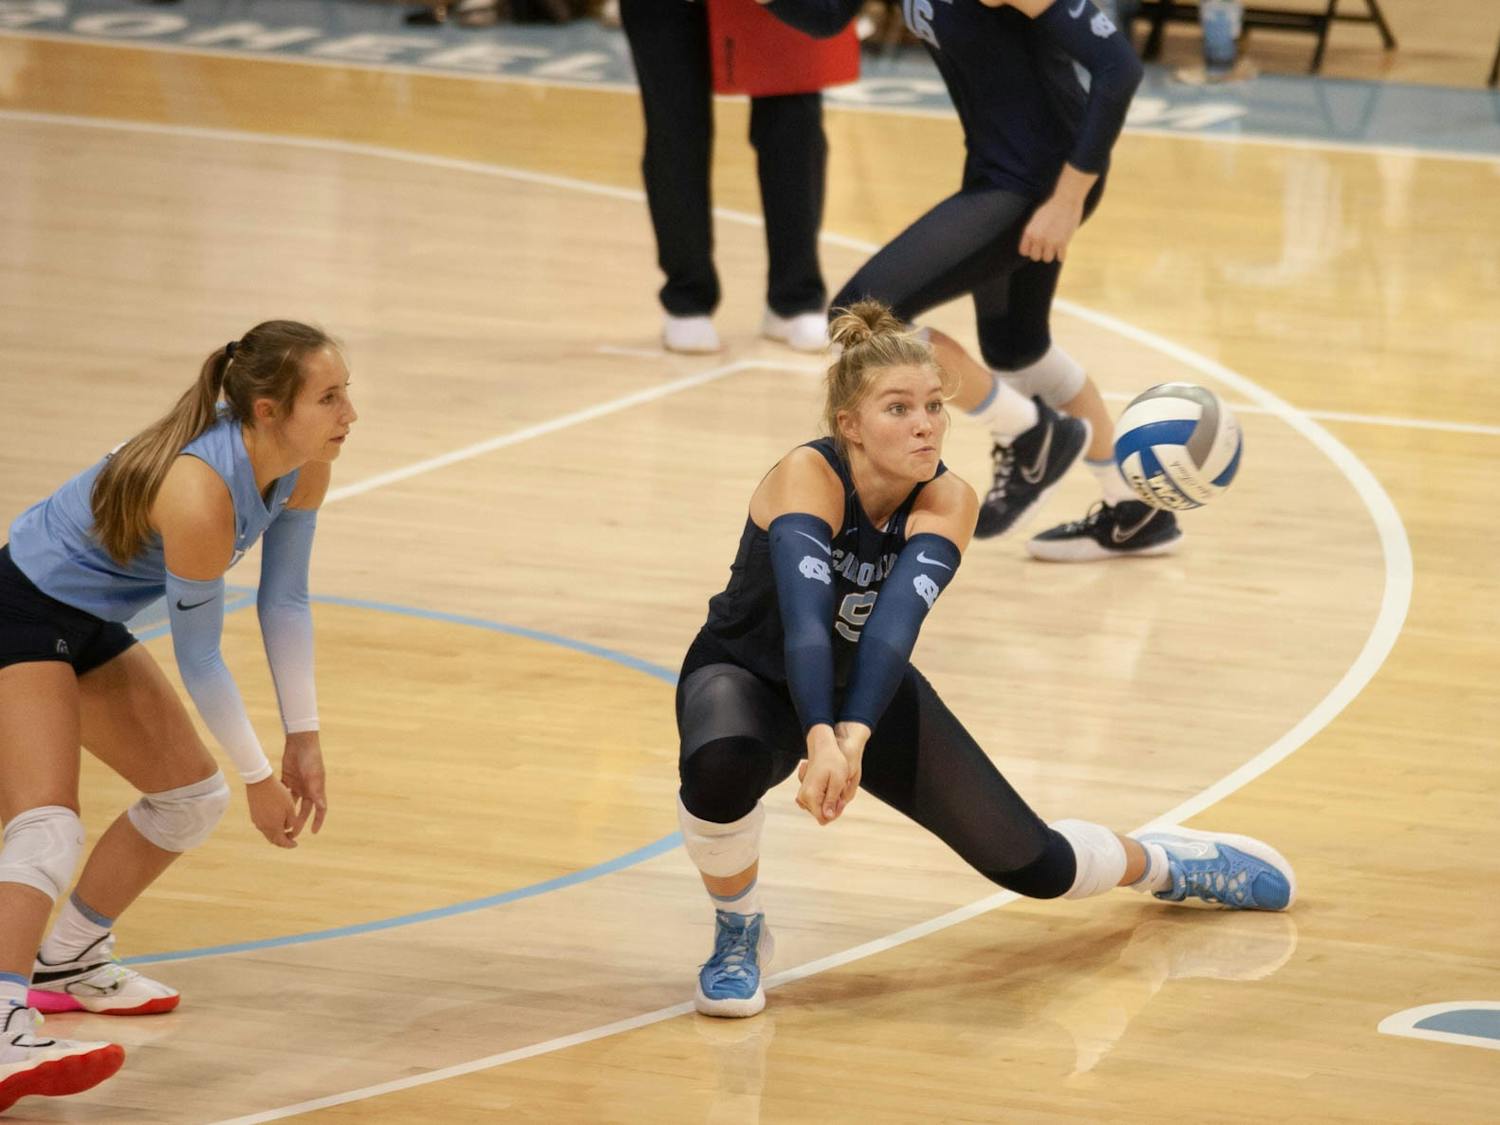 First-year outside hitter Mabrey Shaffmaster (9) saves the ball in the UNC Women's volleyball game against Virginia Tech at the Woolen Gymnasium on Oct. 10. The Heels won 3-0.